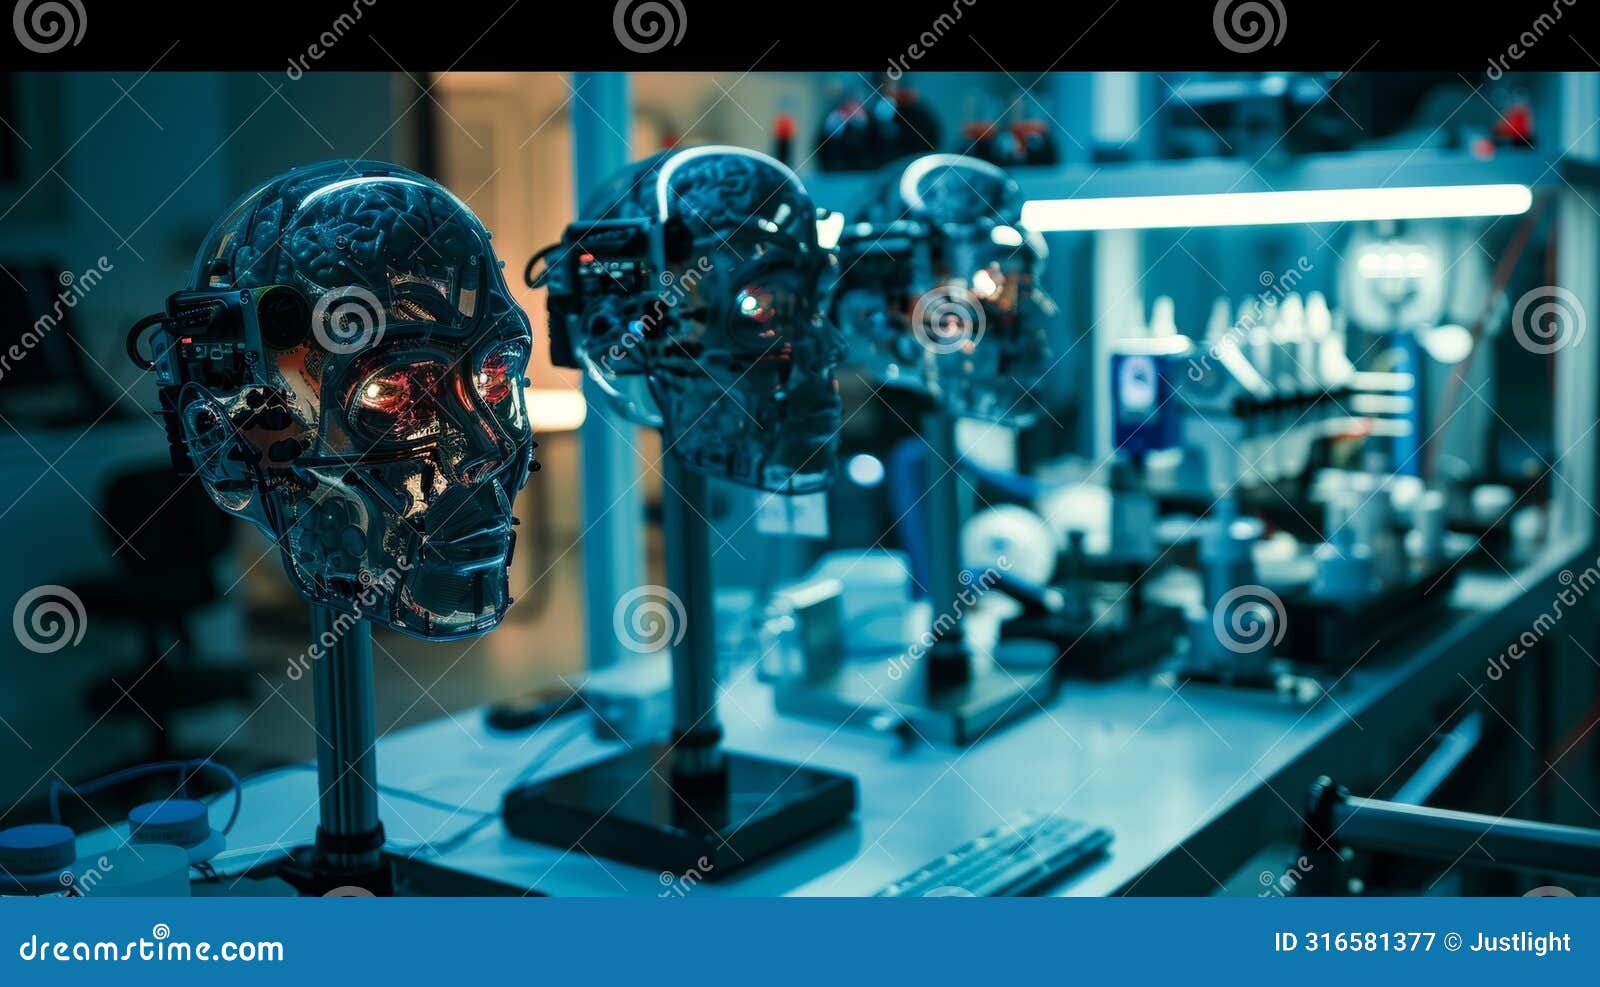 a collection of discarded and outdated neural implants in a laboratory showcasing the constant refinement and